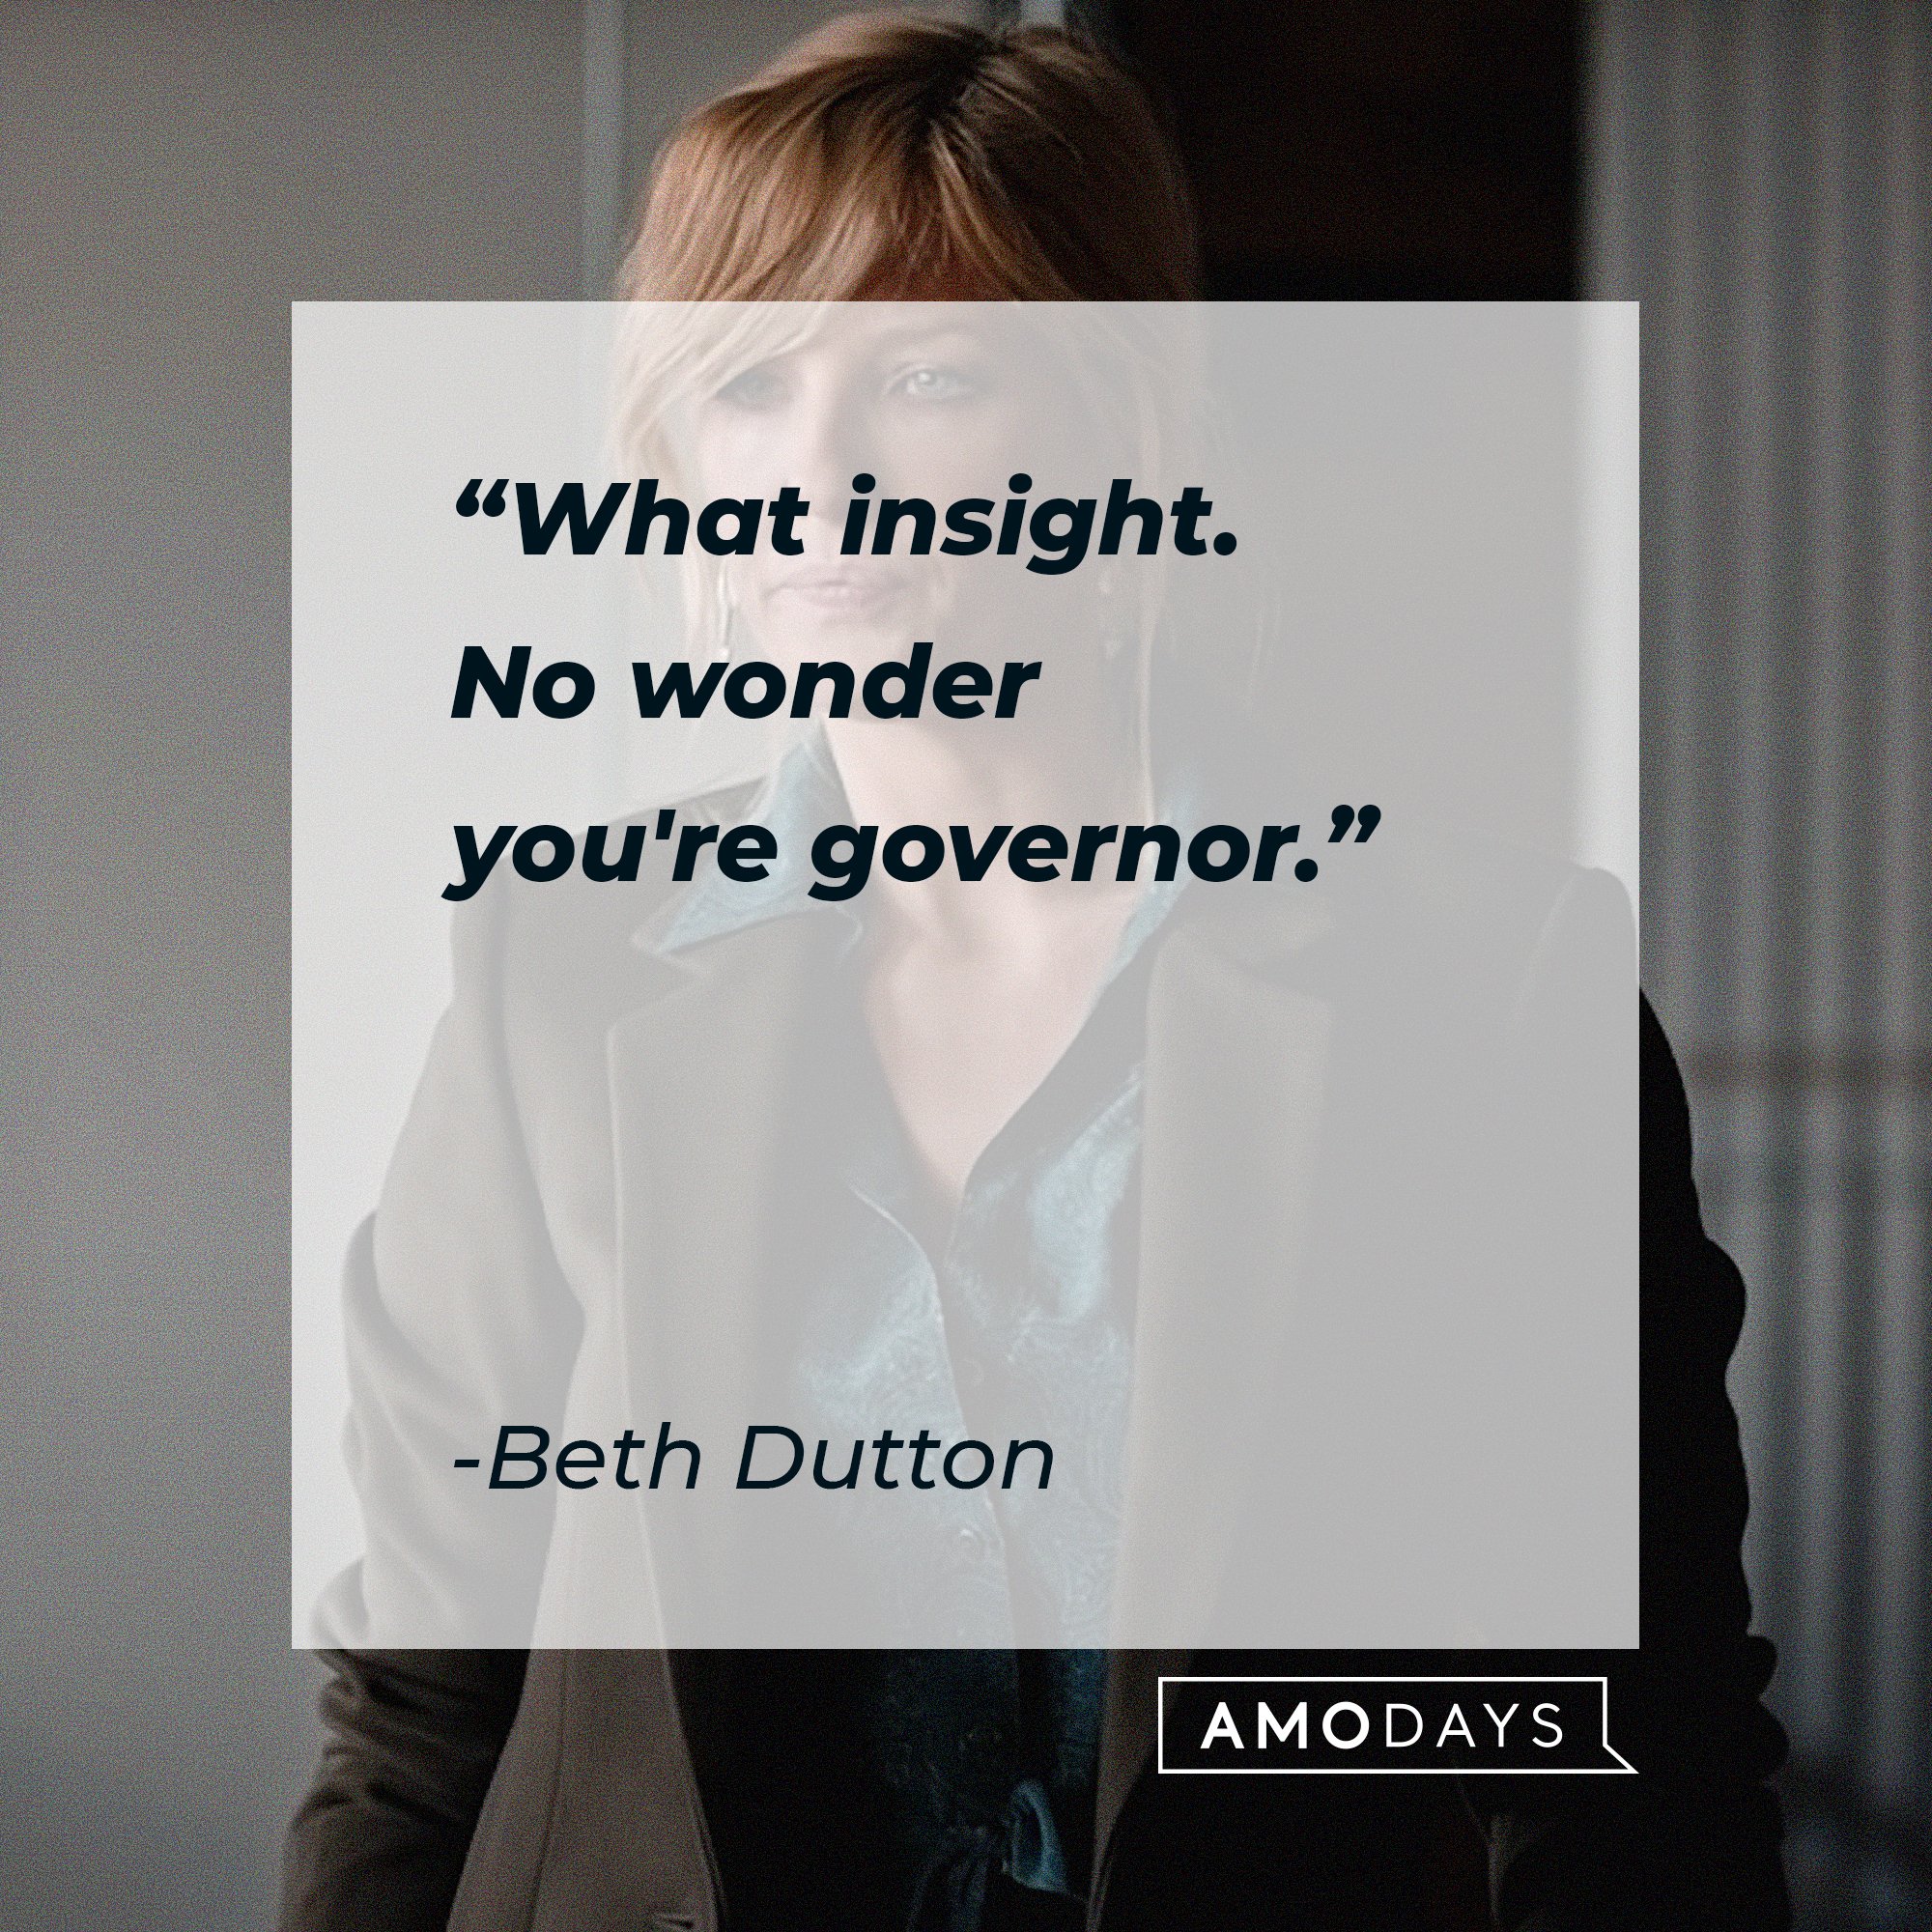  Beth Dutton's quote: "What insight. No wonder you're governor." |  Source: AmoDays